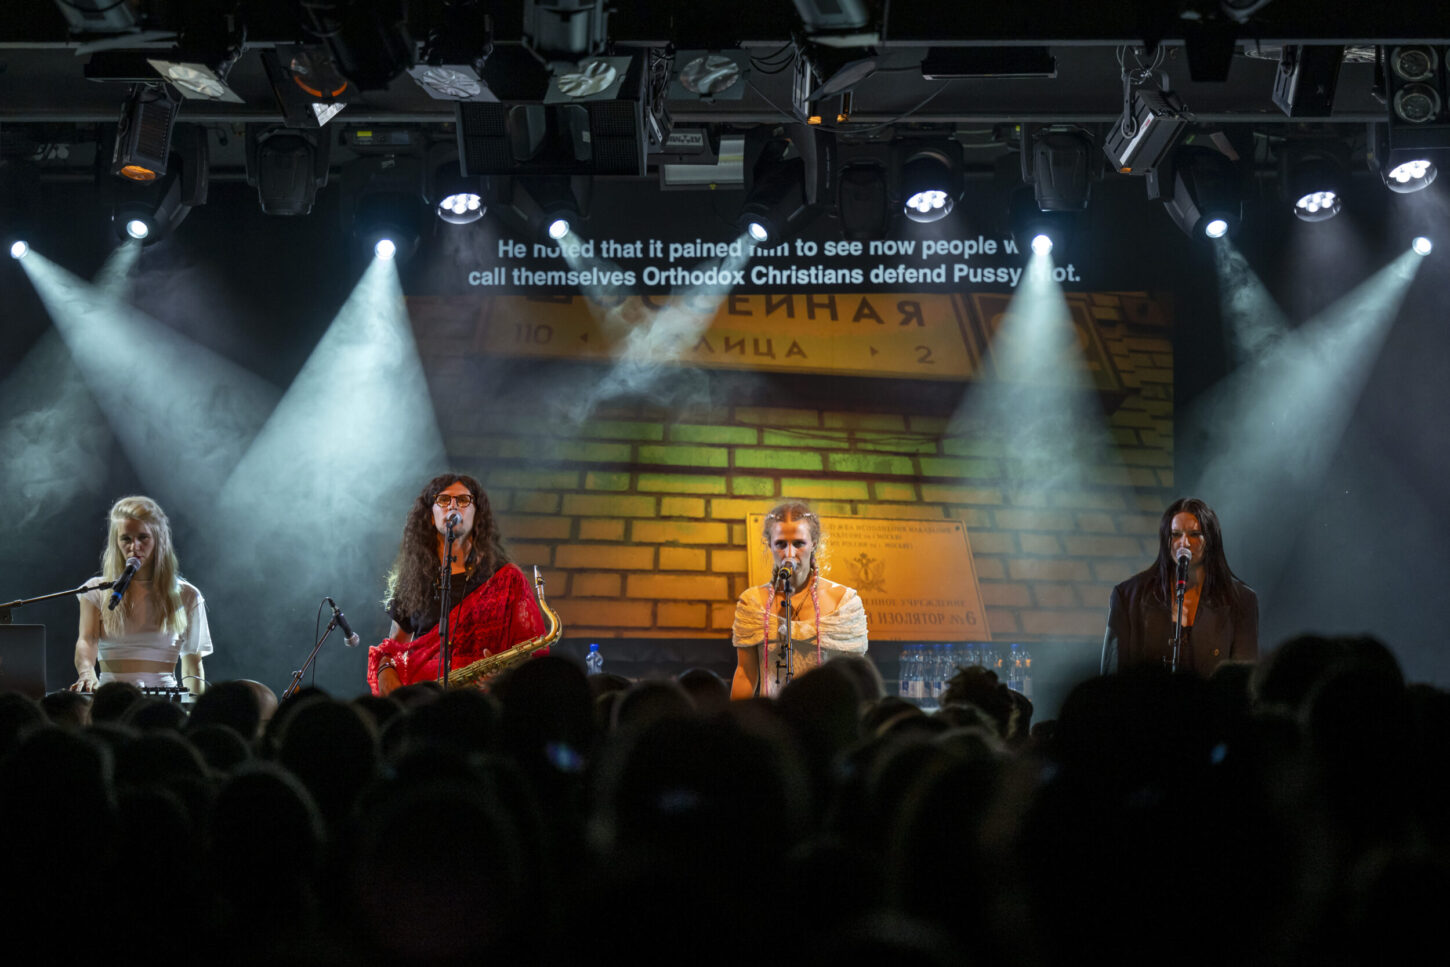 Russian political activists and members of the group Pussy Riot Diana Burkot, Anton Ponomarev, Masha Alyokhina and Olga Borisova, from left, perform on stage during a concert at the Kaserne in Basel, Switzerland, on Tuesday, June 14, 2022. (KEYSTONE/Georgios Kefalas)